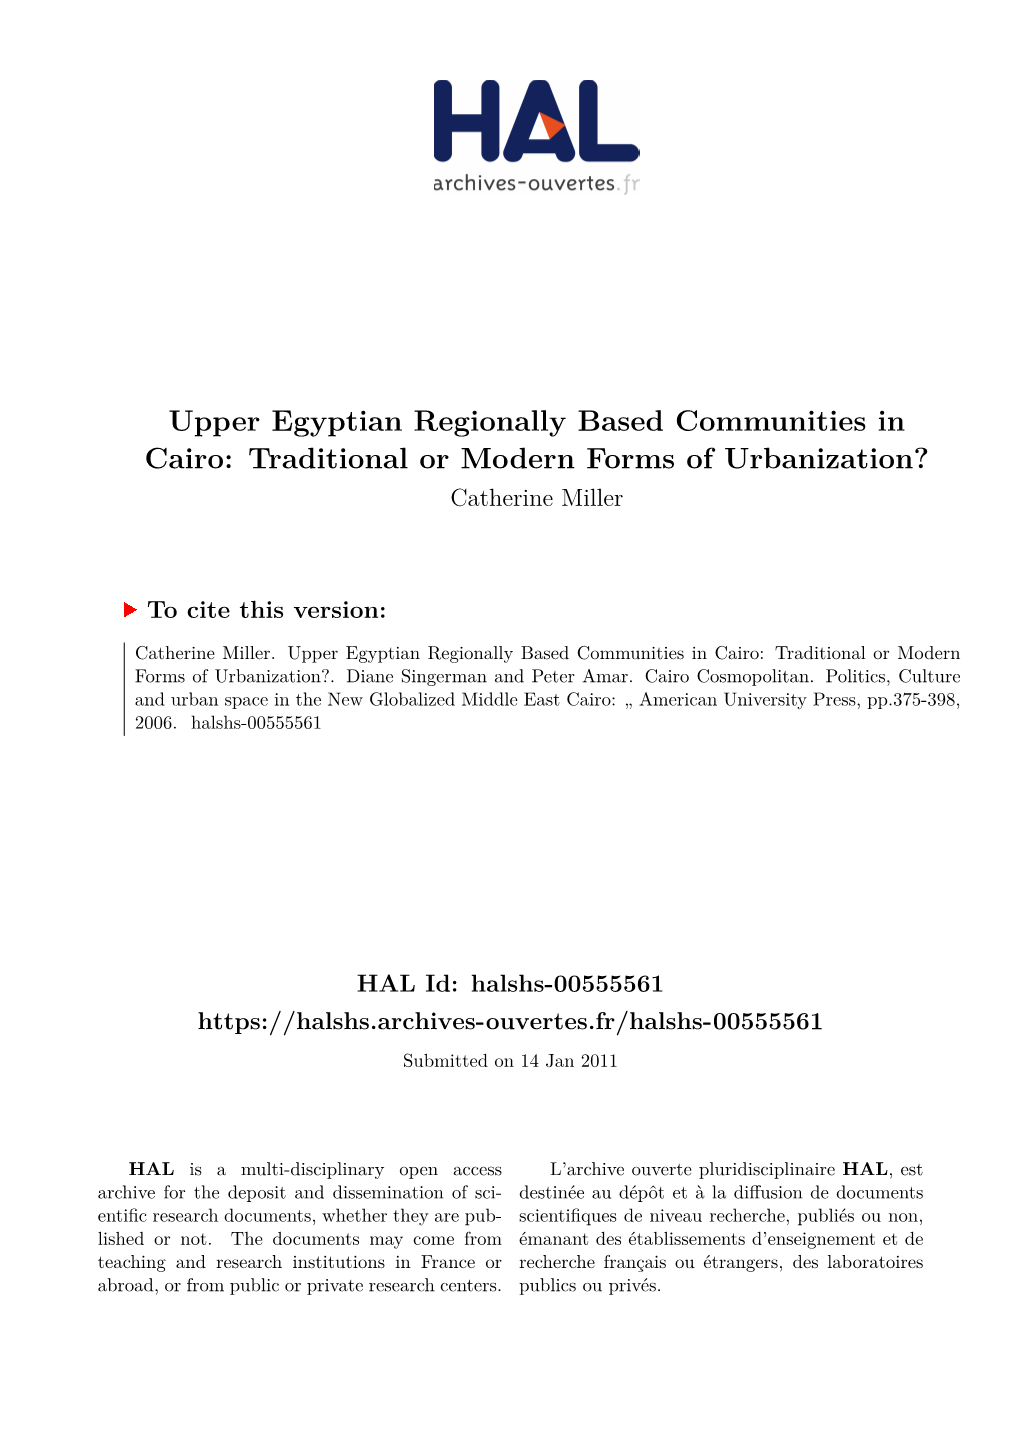 Upper Egyptian Regionally Based Communities in Cairo: Traditional Or Modern Forms of Urbanization? Catherine Miller